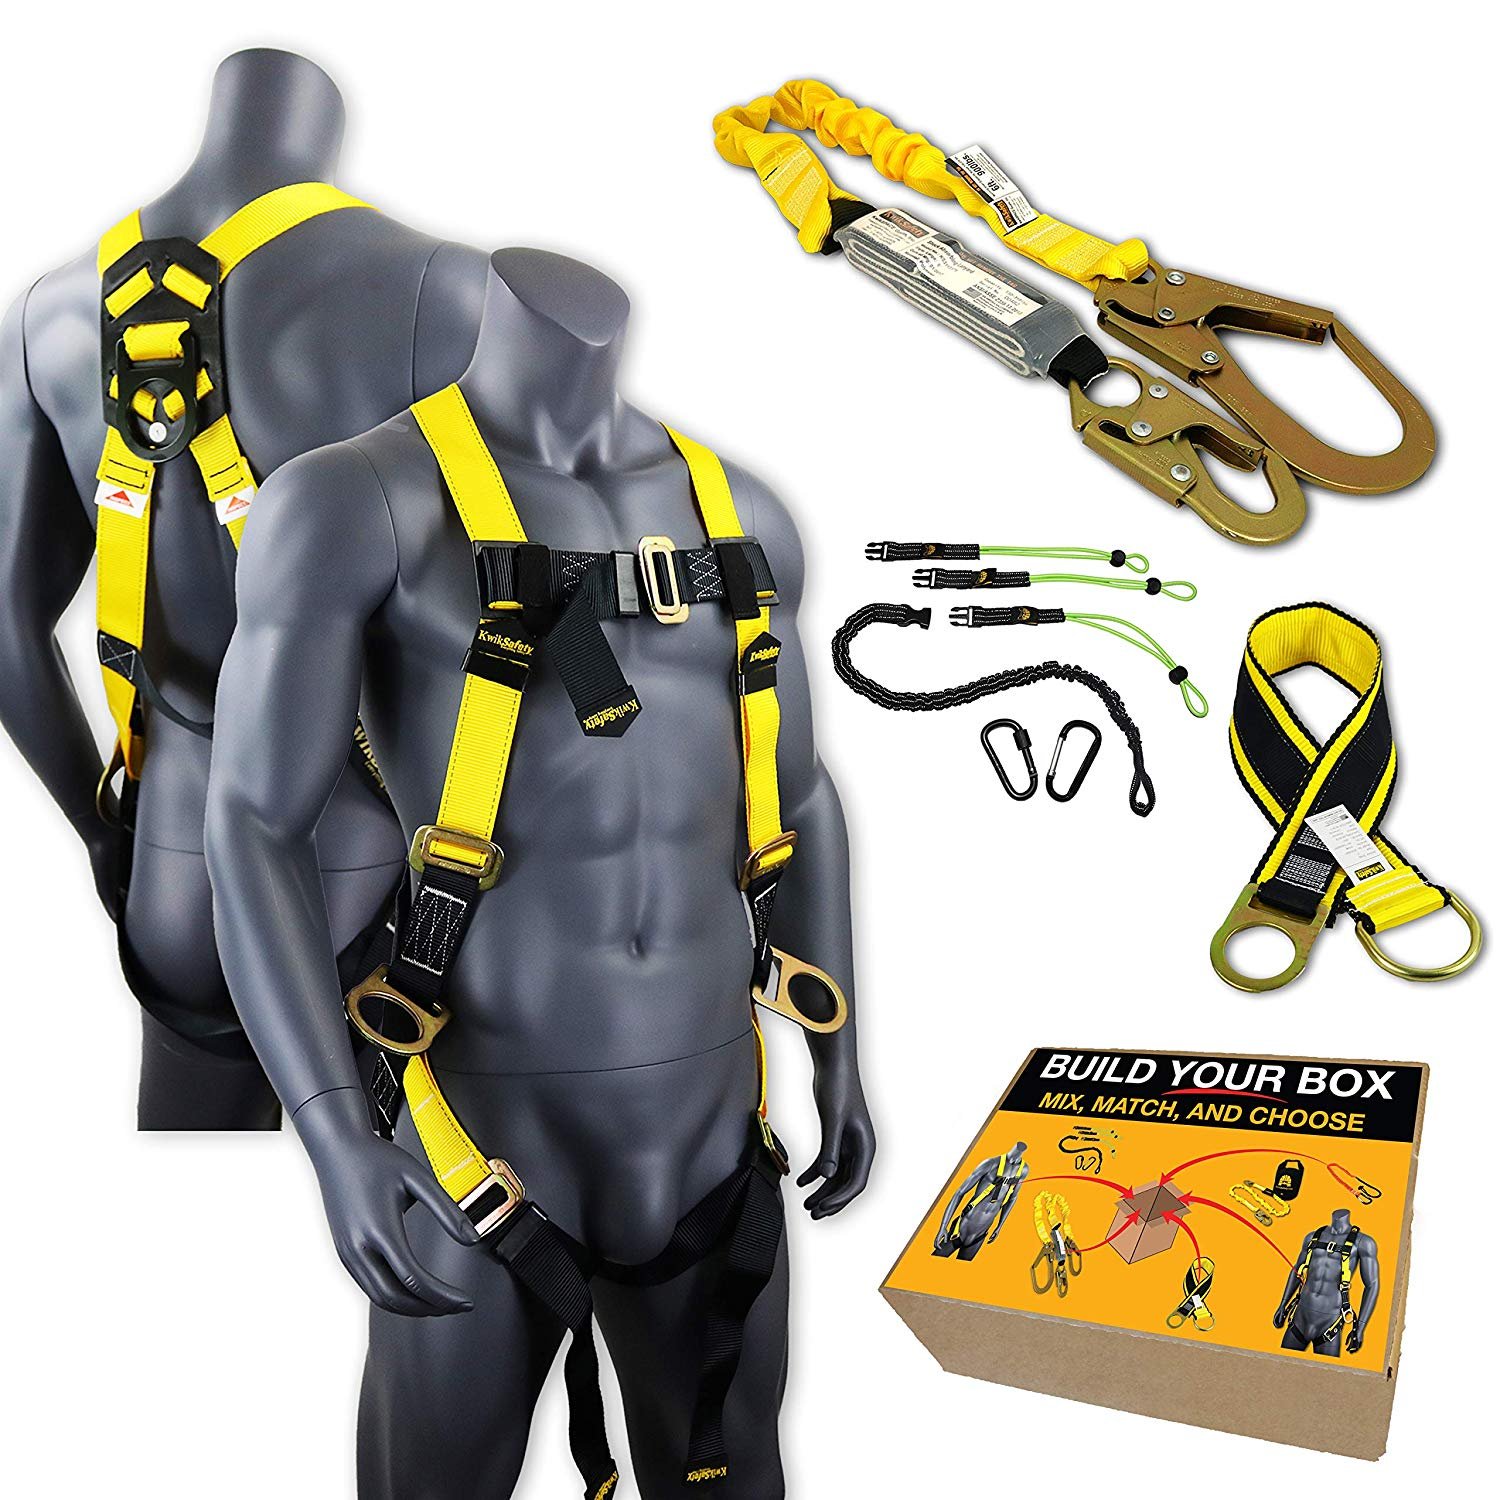 Best Full Body Fall Protection Harness - Top 4 Harnesses ...